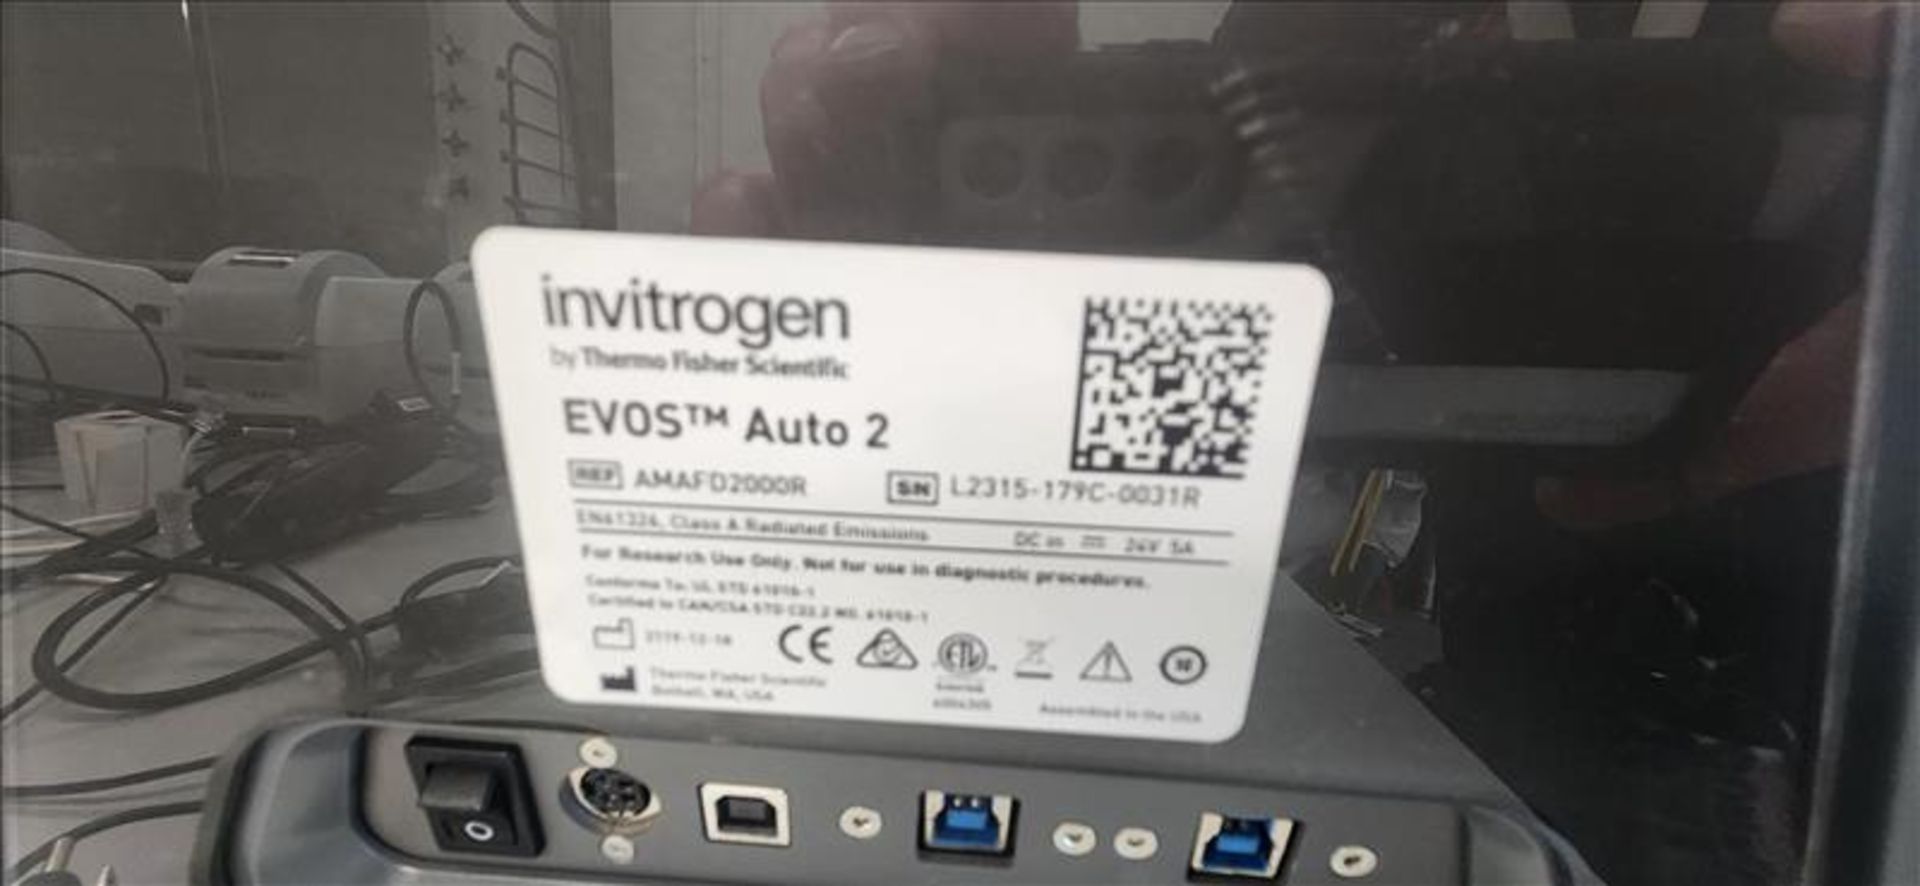 Thermo Fisher Invitrogen EVOS Auto 2 Imaging System, S/N L2315-179C-0031R - Image 3 of 3